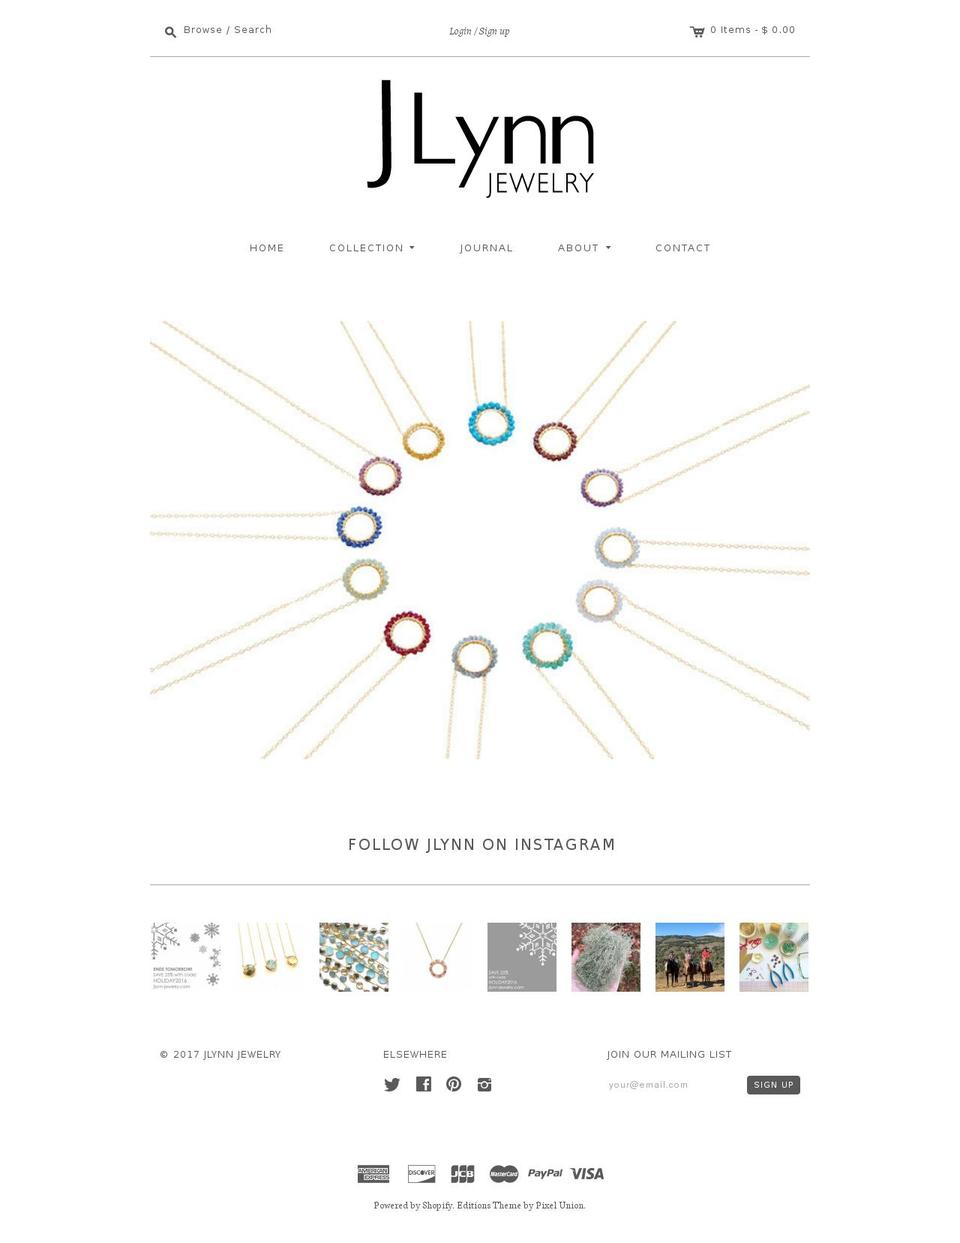 Editions Shopify theme site example jlynn-jewelry.com